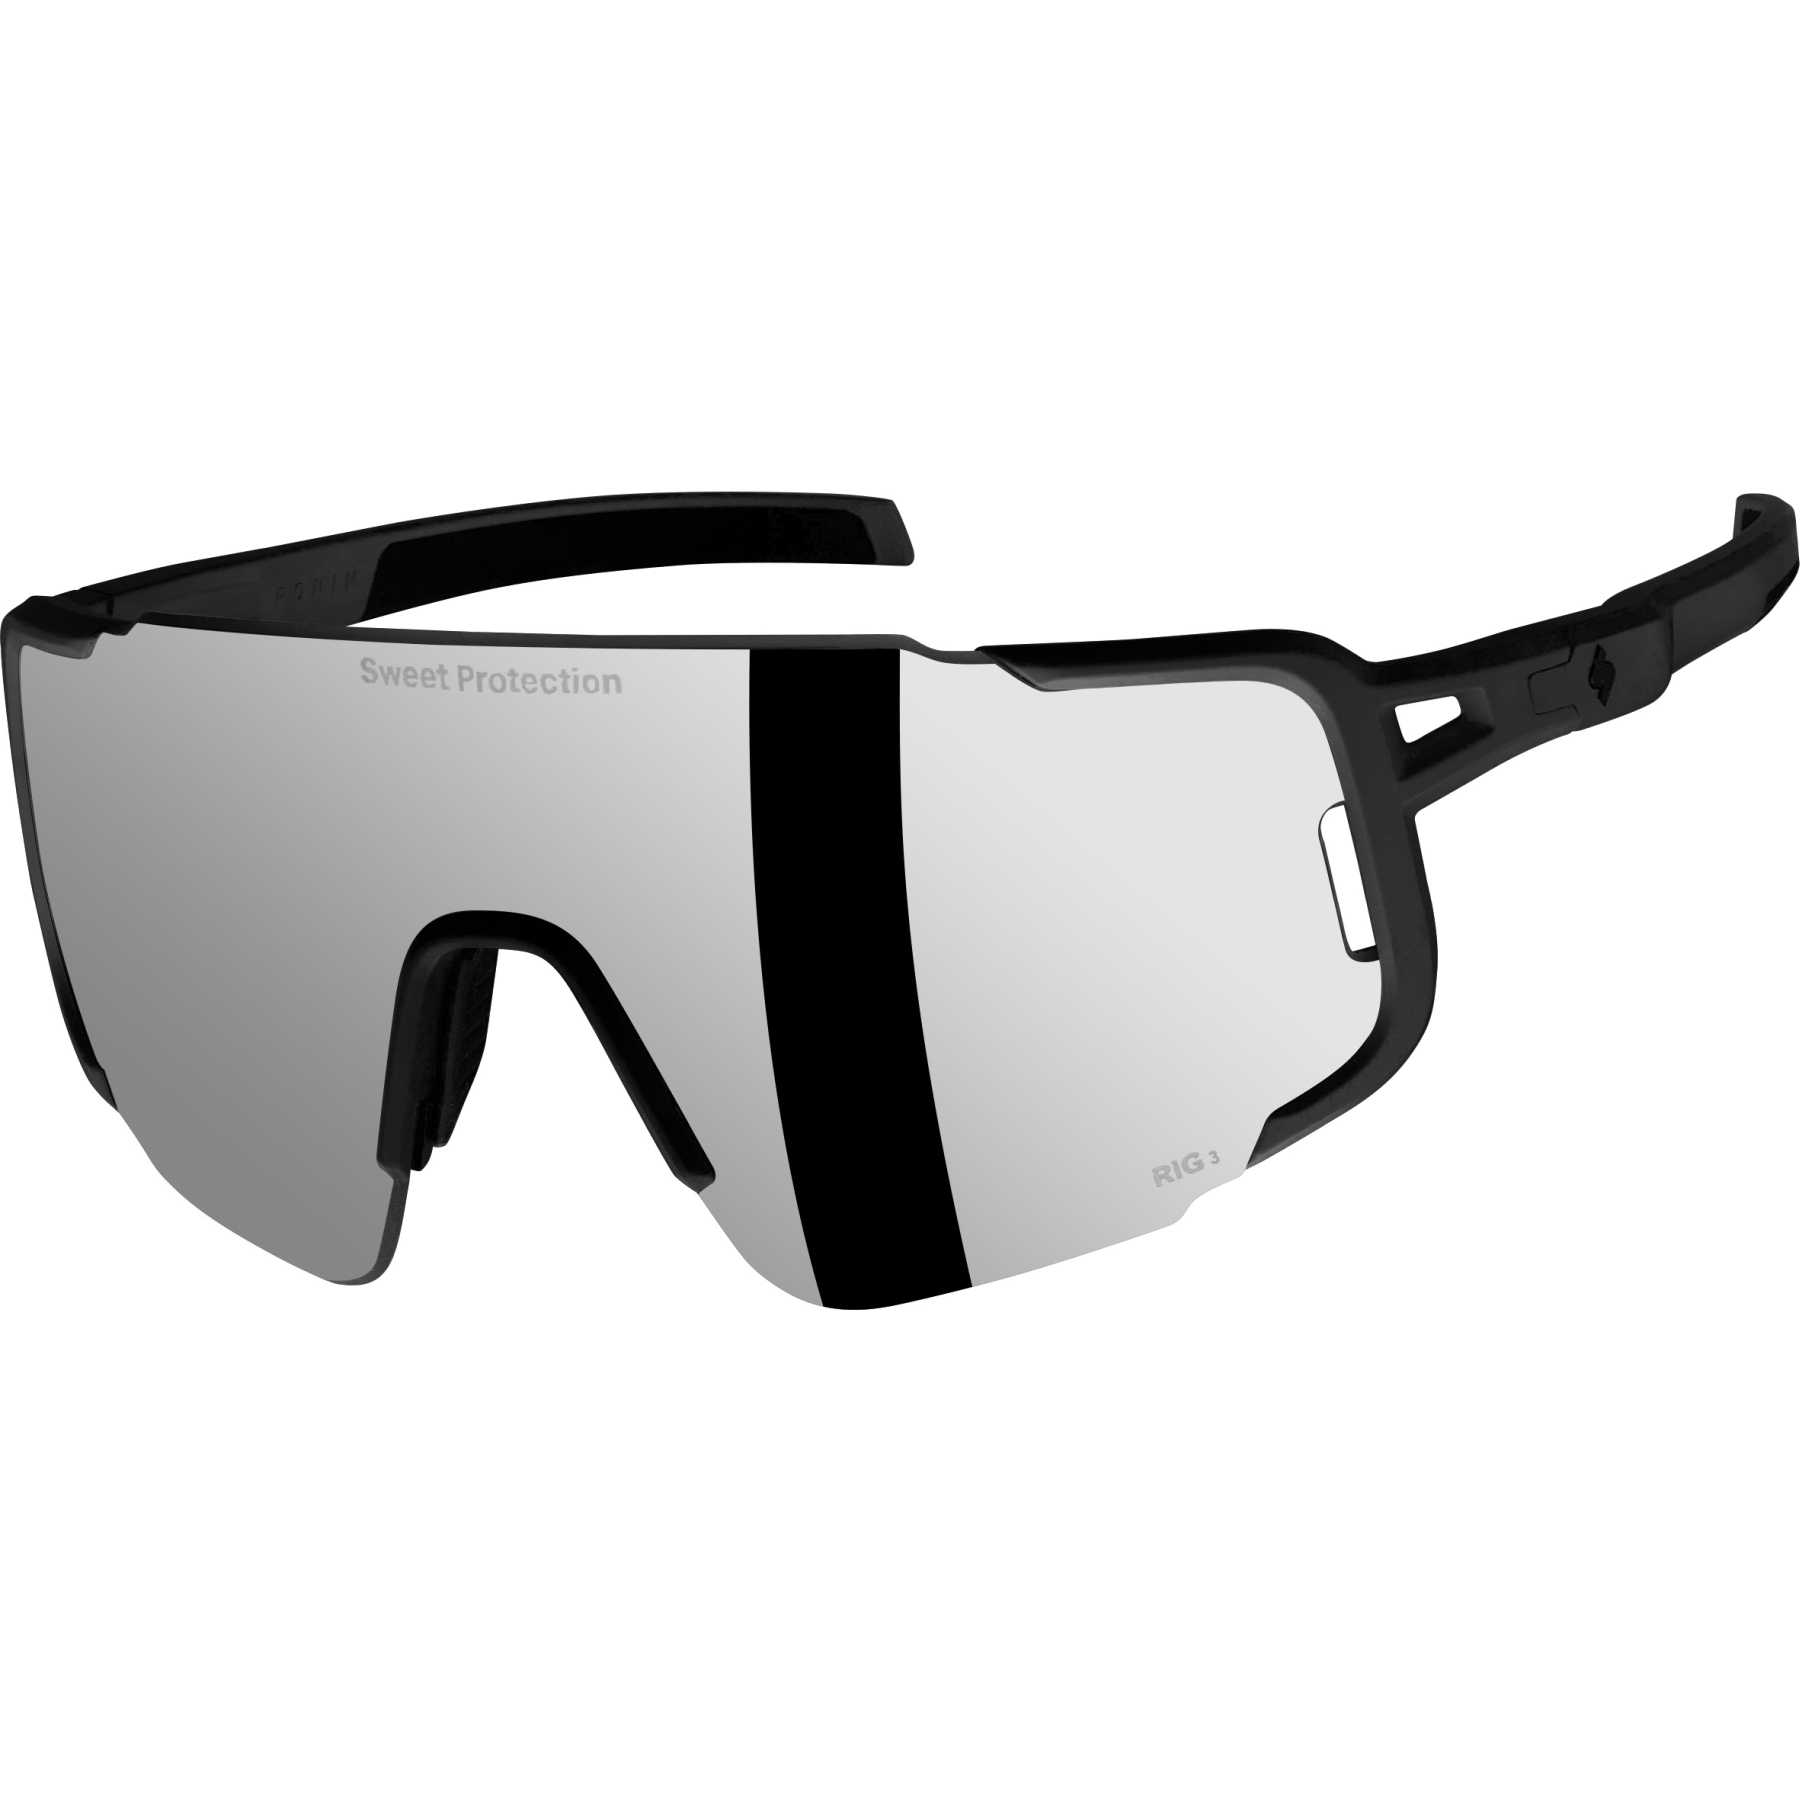 Picture of SWEET Protection Ronin Max RIG Reflect Glasses - RIG Obsidian/Matte Black